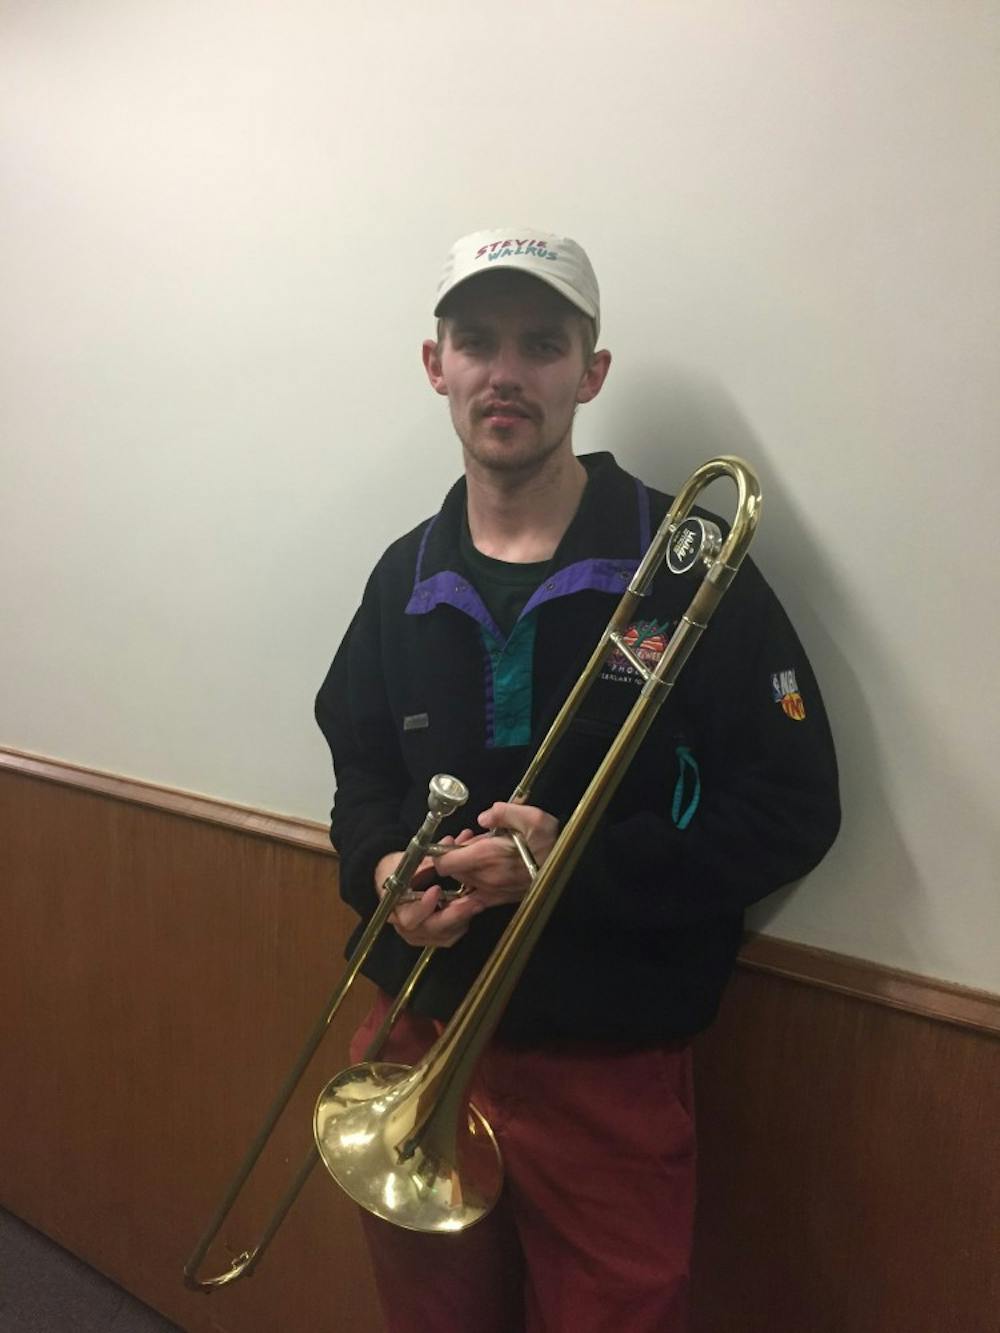 <p>Electrical engineering senior Mike Giles goes by the stage name, "Stevie Walrus." He uses his trombone to play over popular music tracks such as&nbsp;“Broccoli” by D.R.A.M.</p>